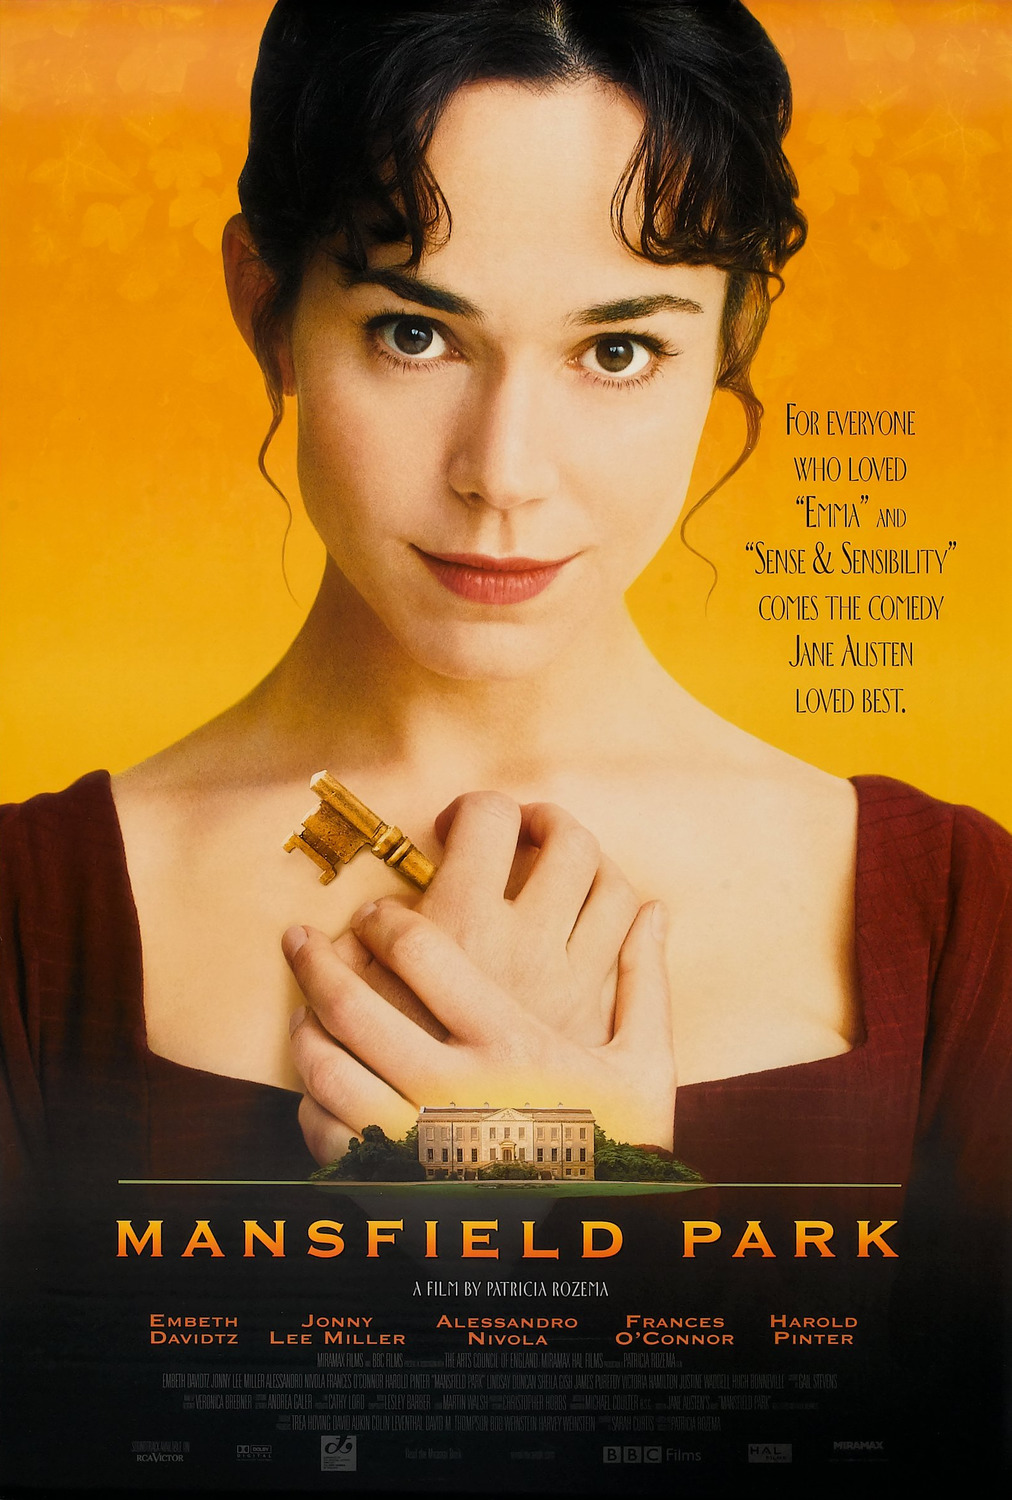 Mansfield Park movies in Poland